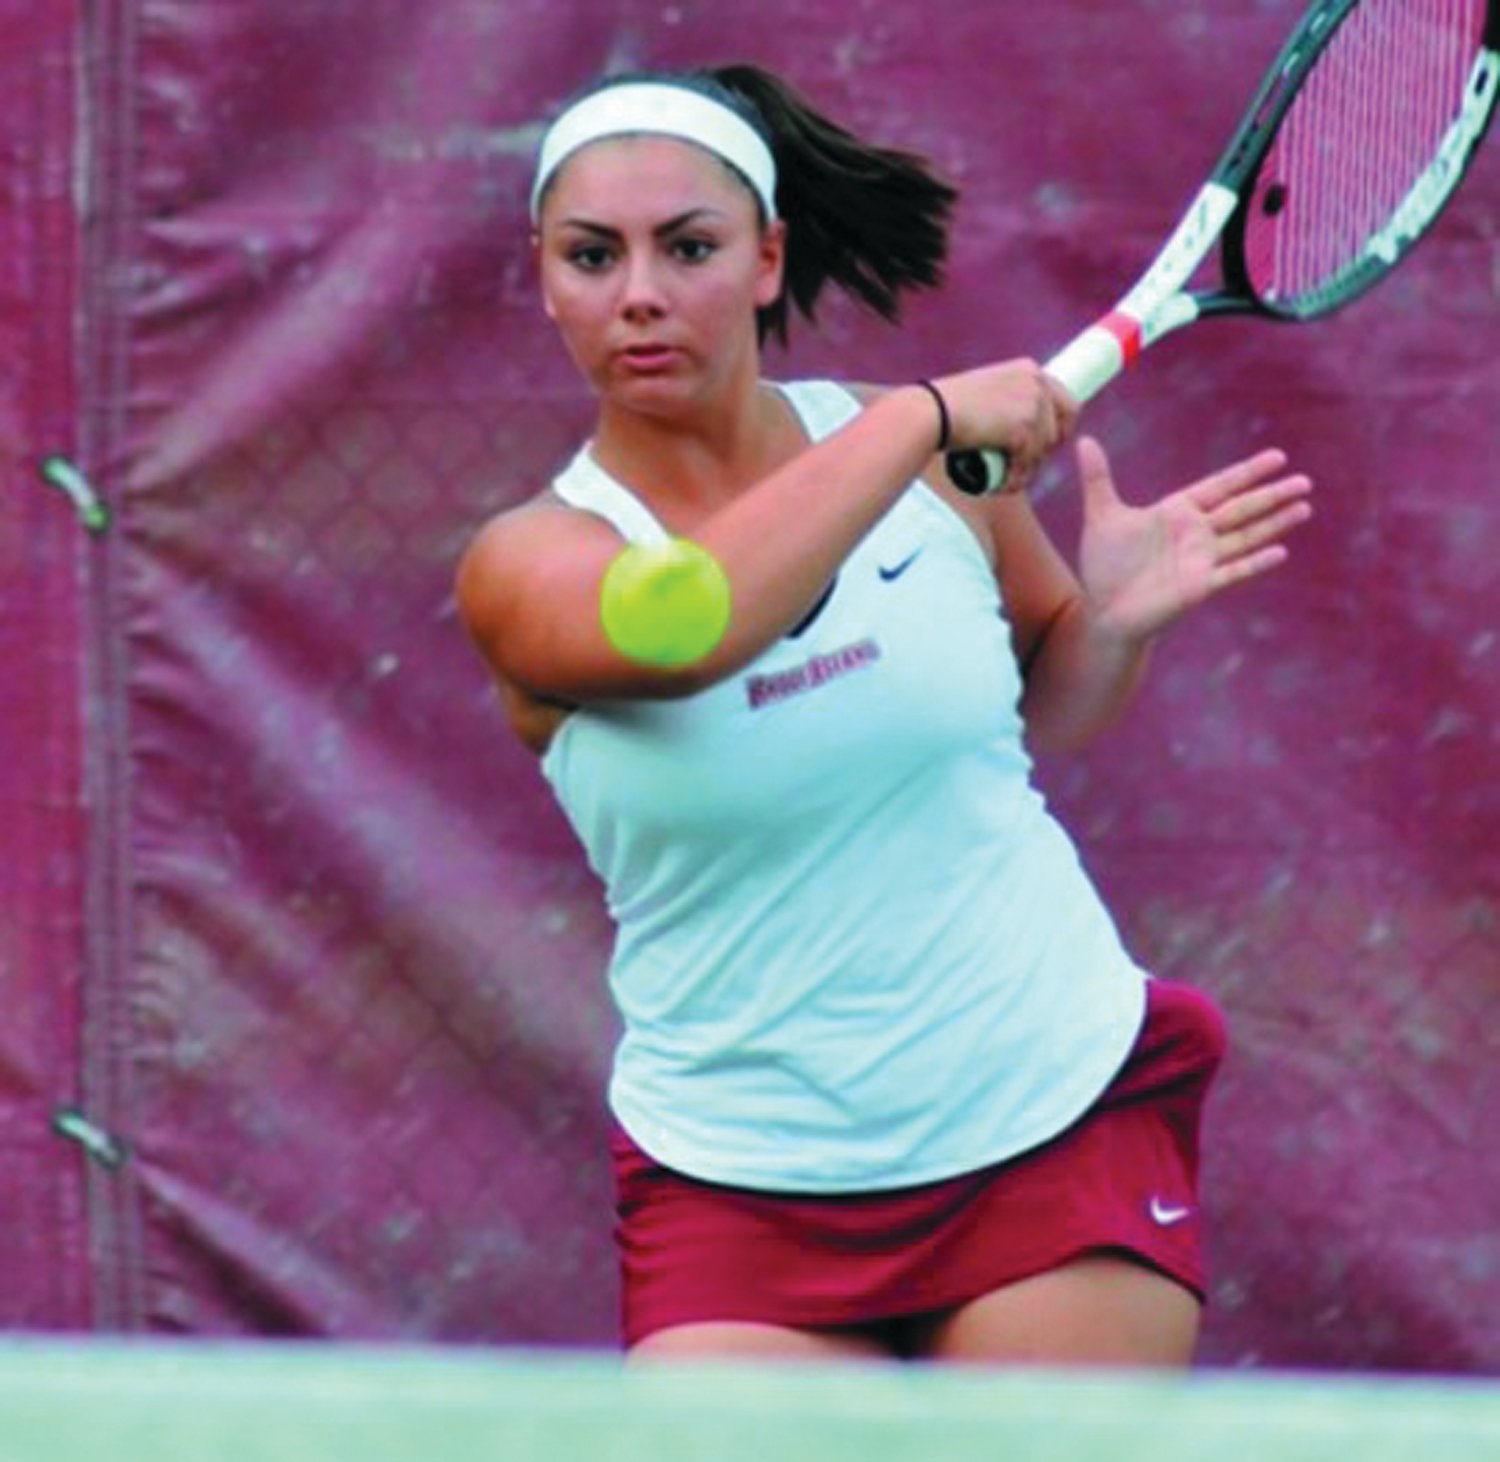 RETURN SHOT: Jenna Lisi returns a shot for RIC in this file photo. Lisi was named the Jill Craybas Award winner for the third straight year, which recognizes the state’s top female college tennis player.